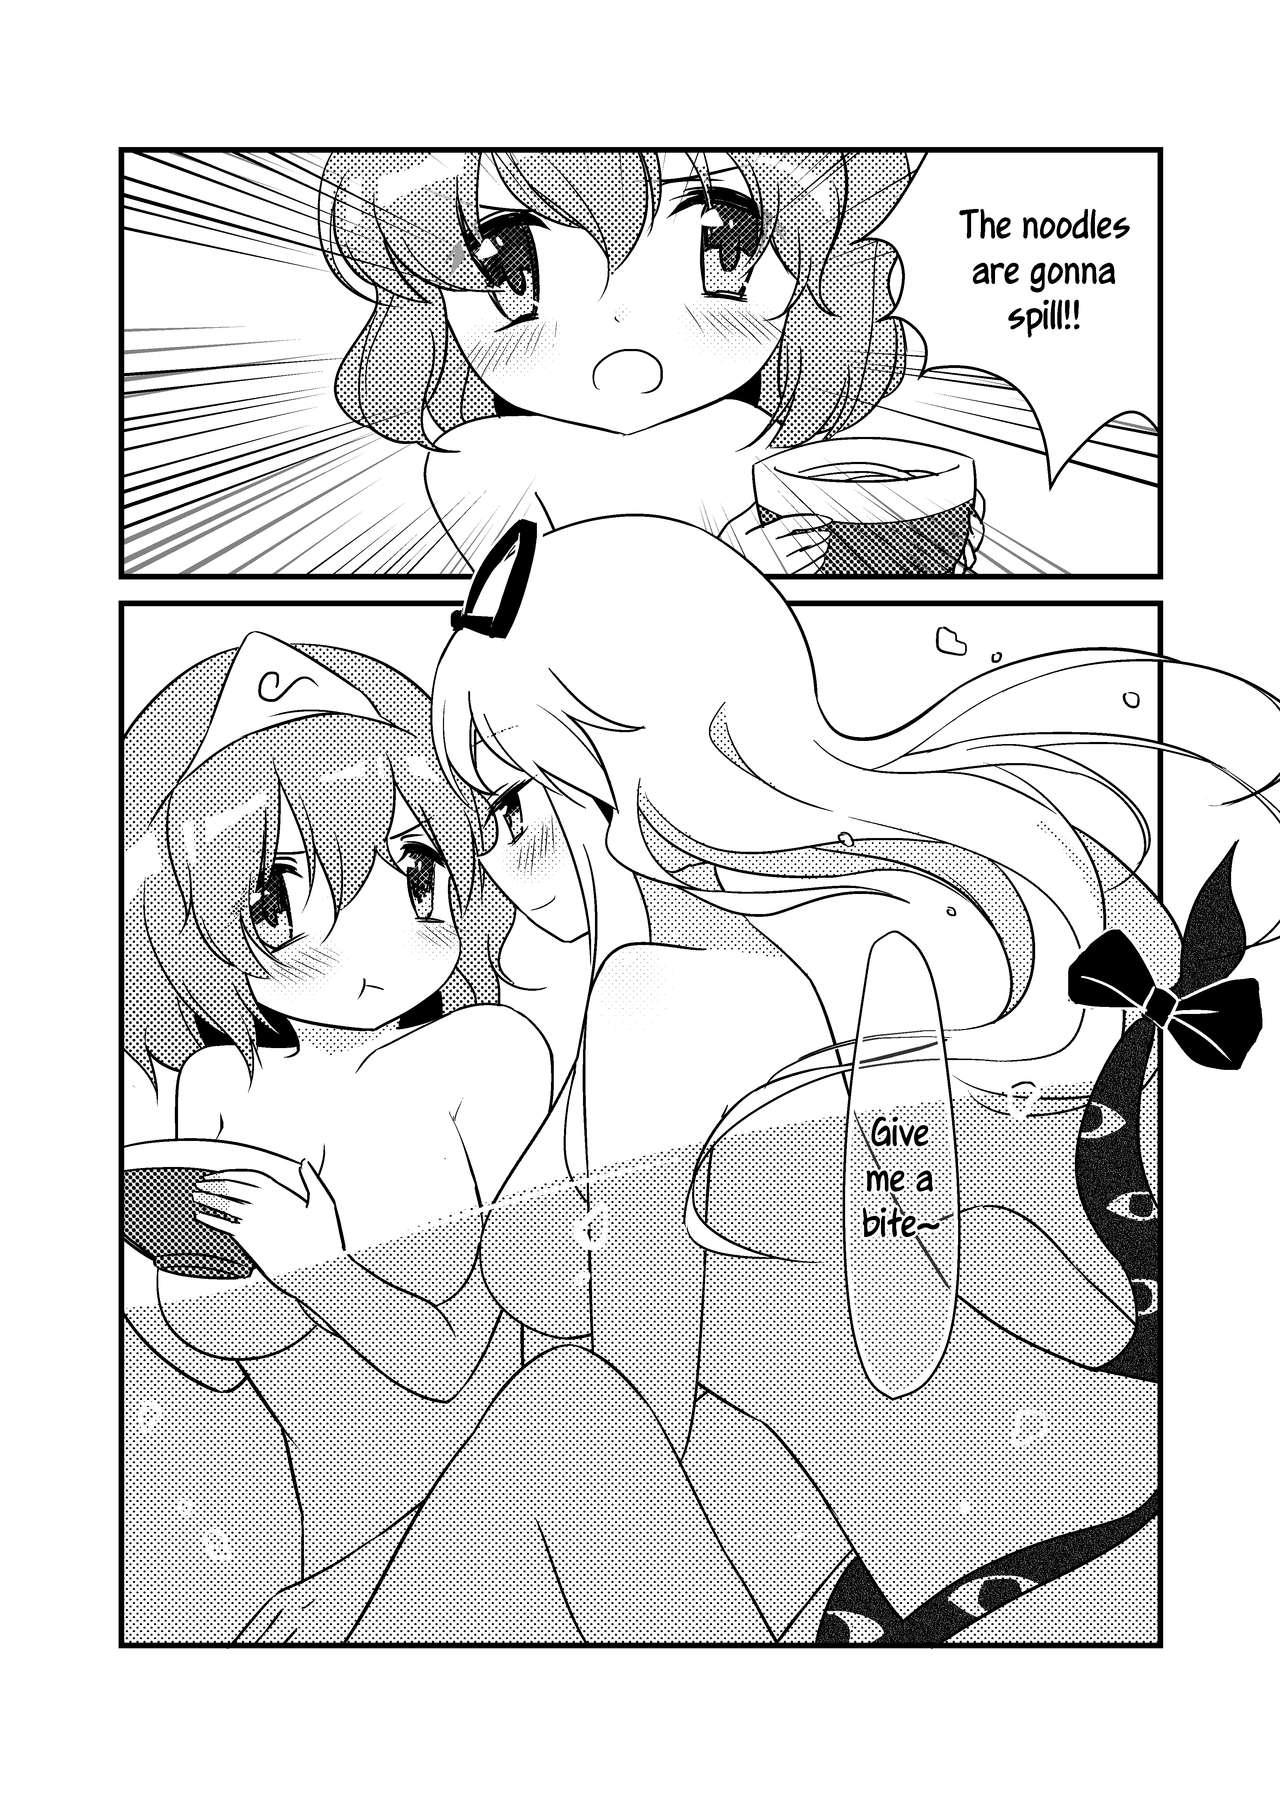 Oiled ????一起泡温泉吧！ | ????Let's Soak in the Hot Spring! - Touhou project Putaria - Page 6